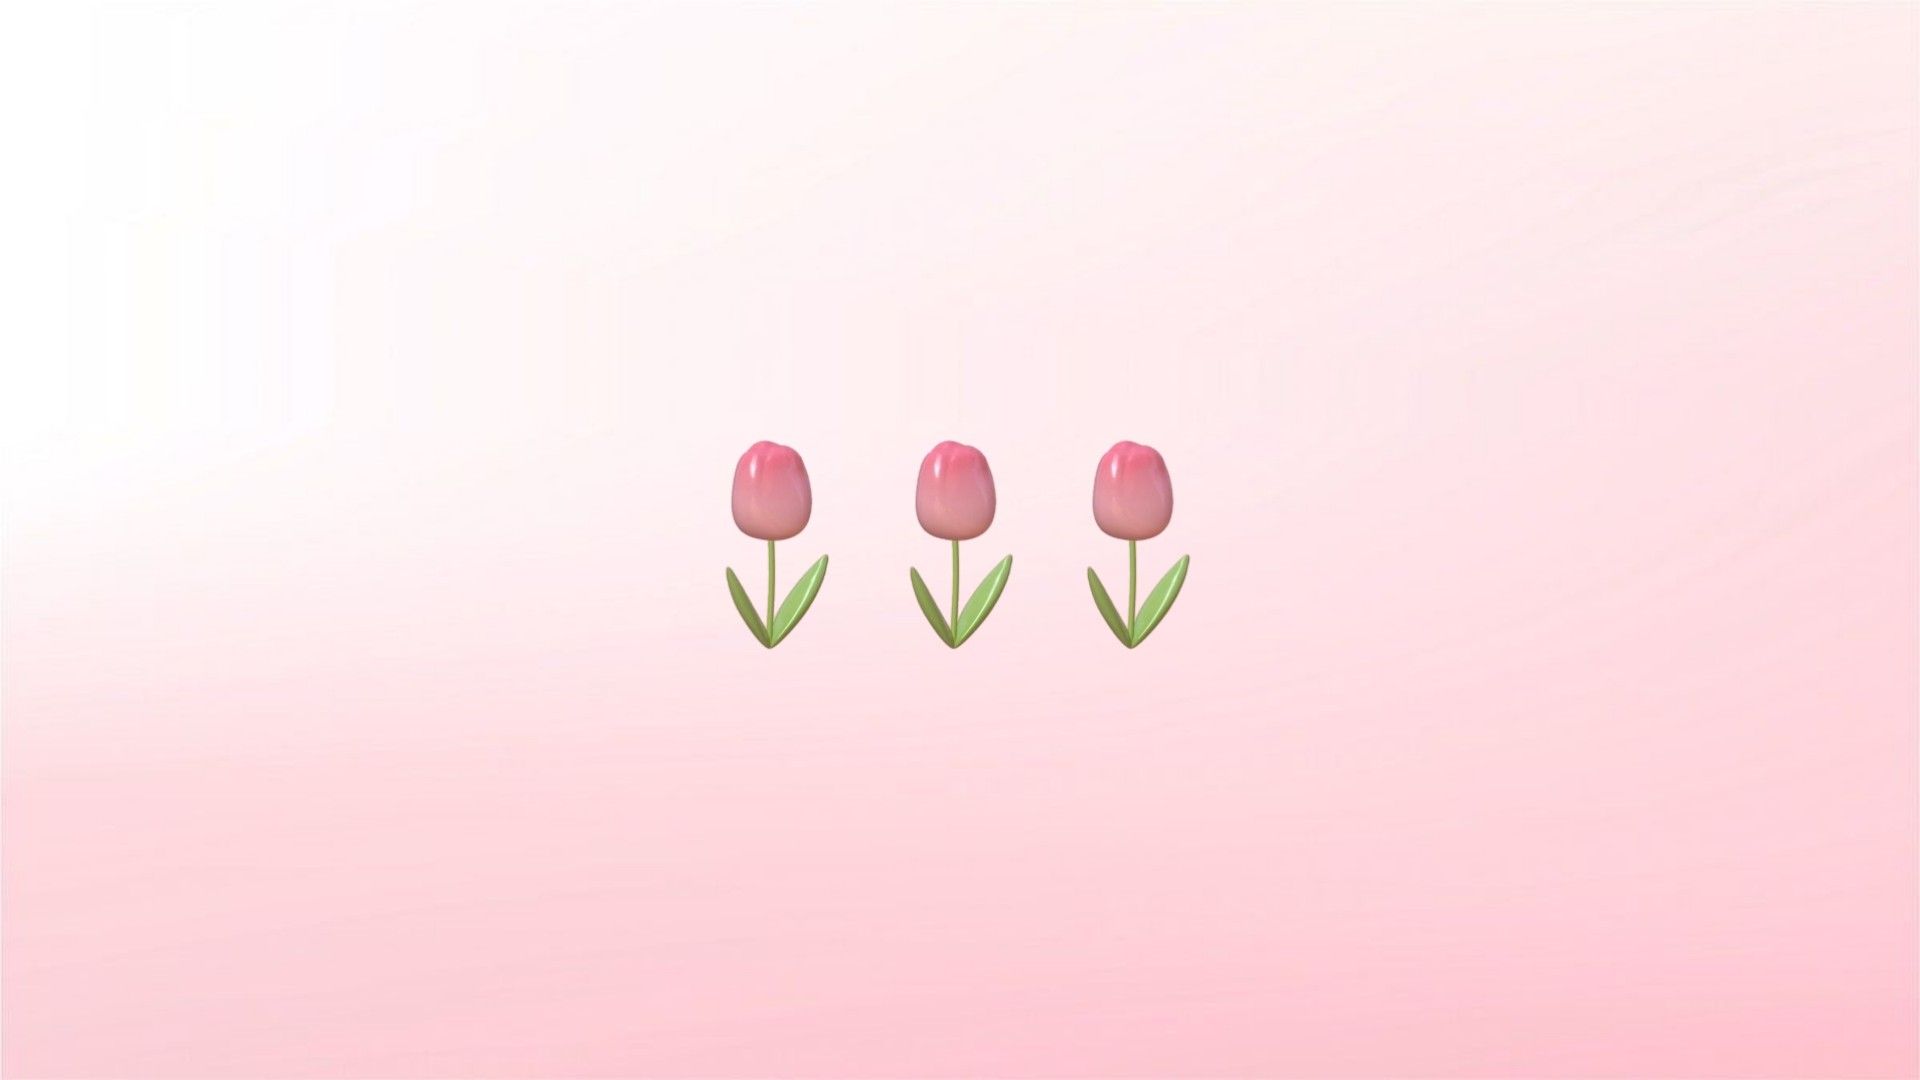 Tulips wallpaper for your phone and desktop. - Coquette